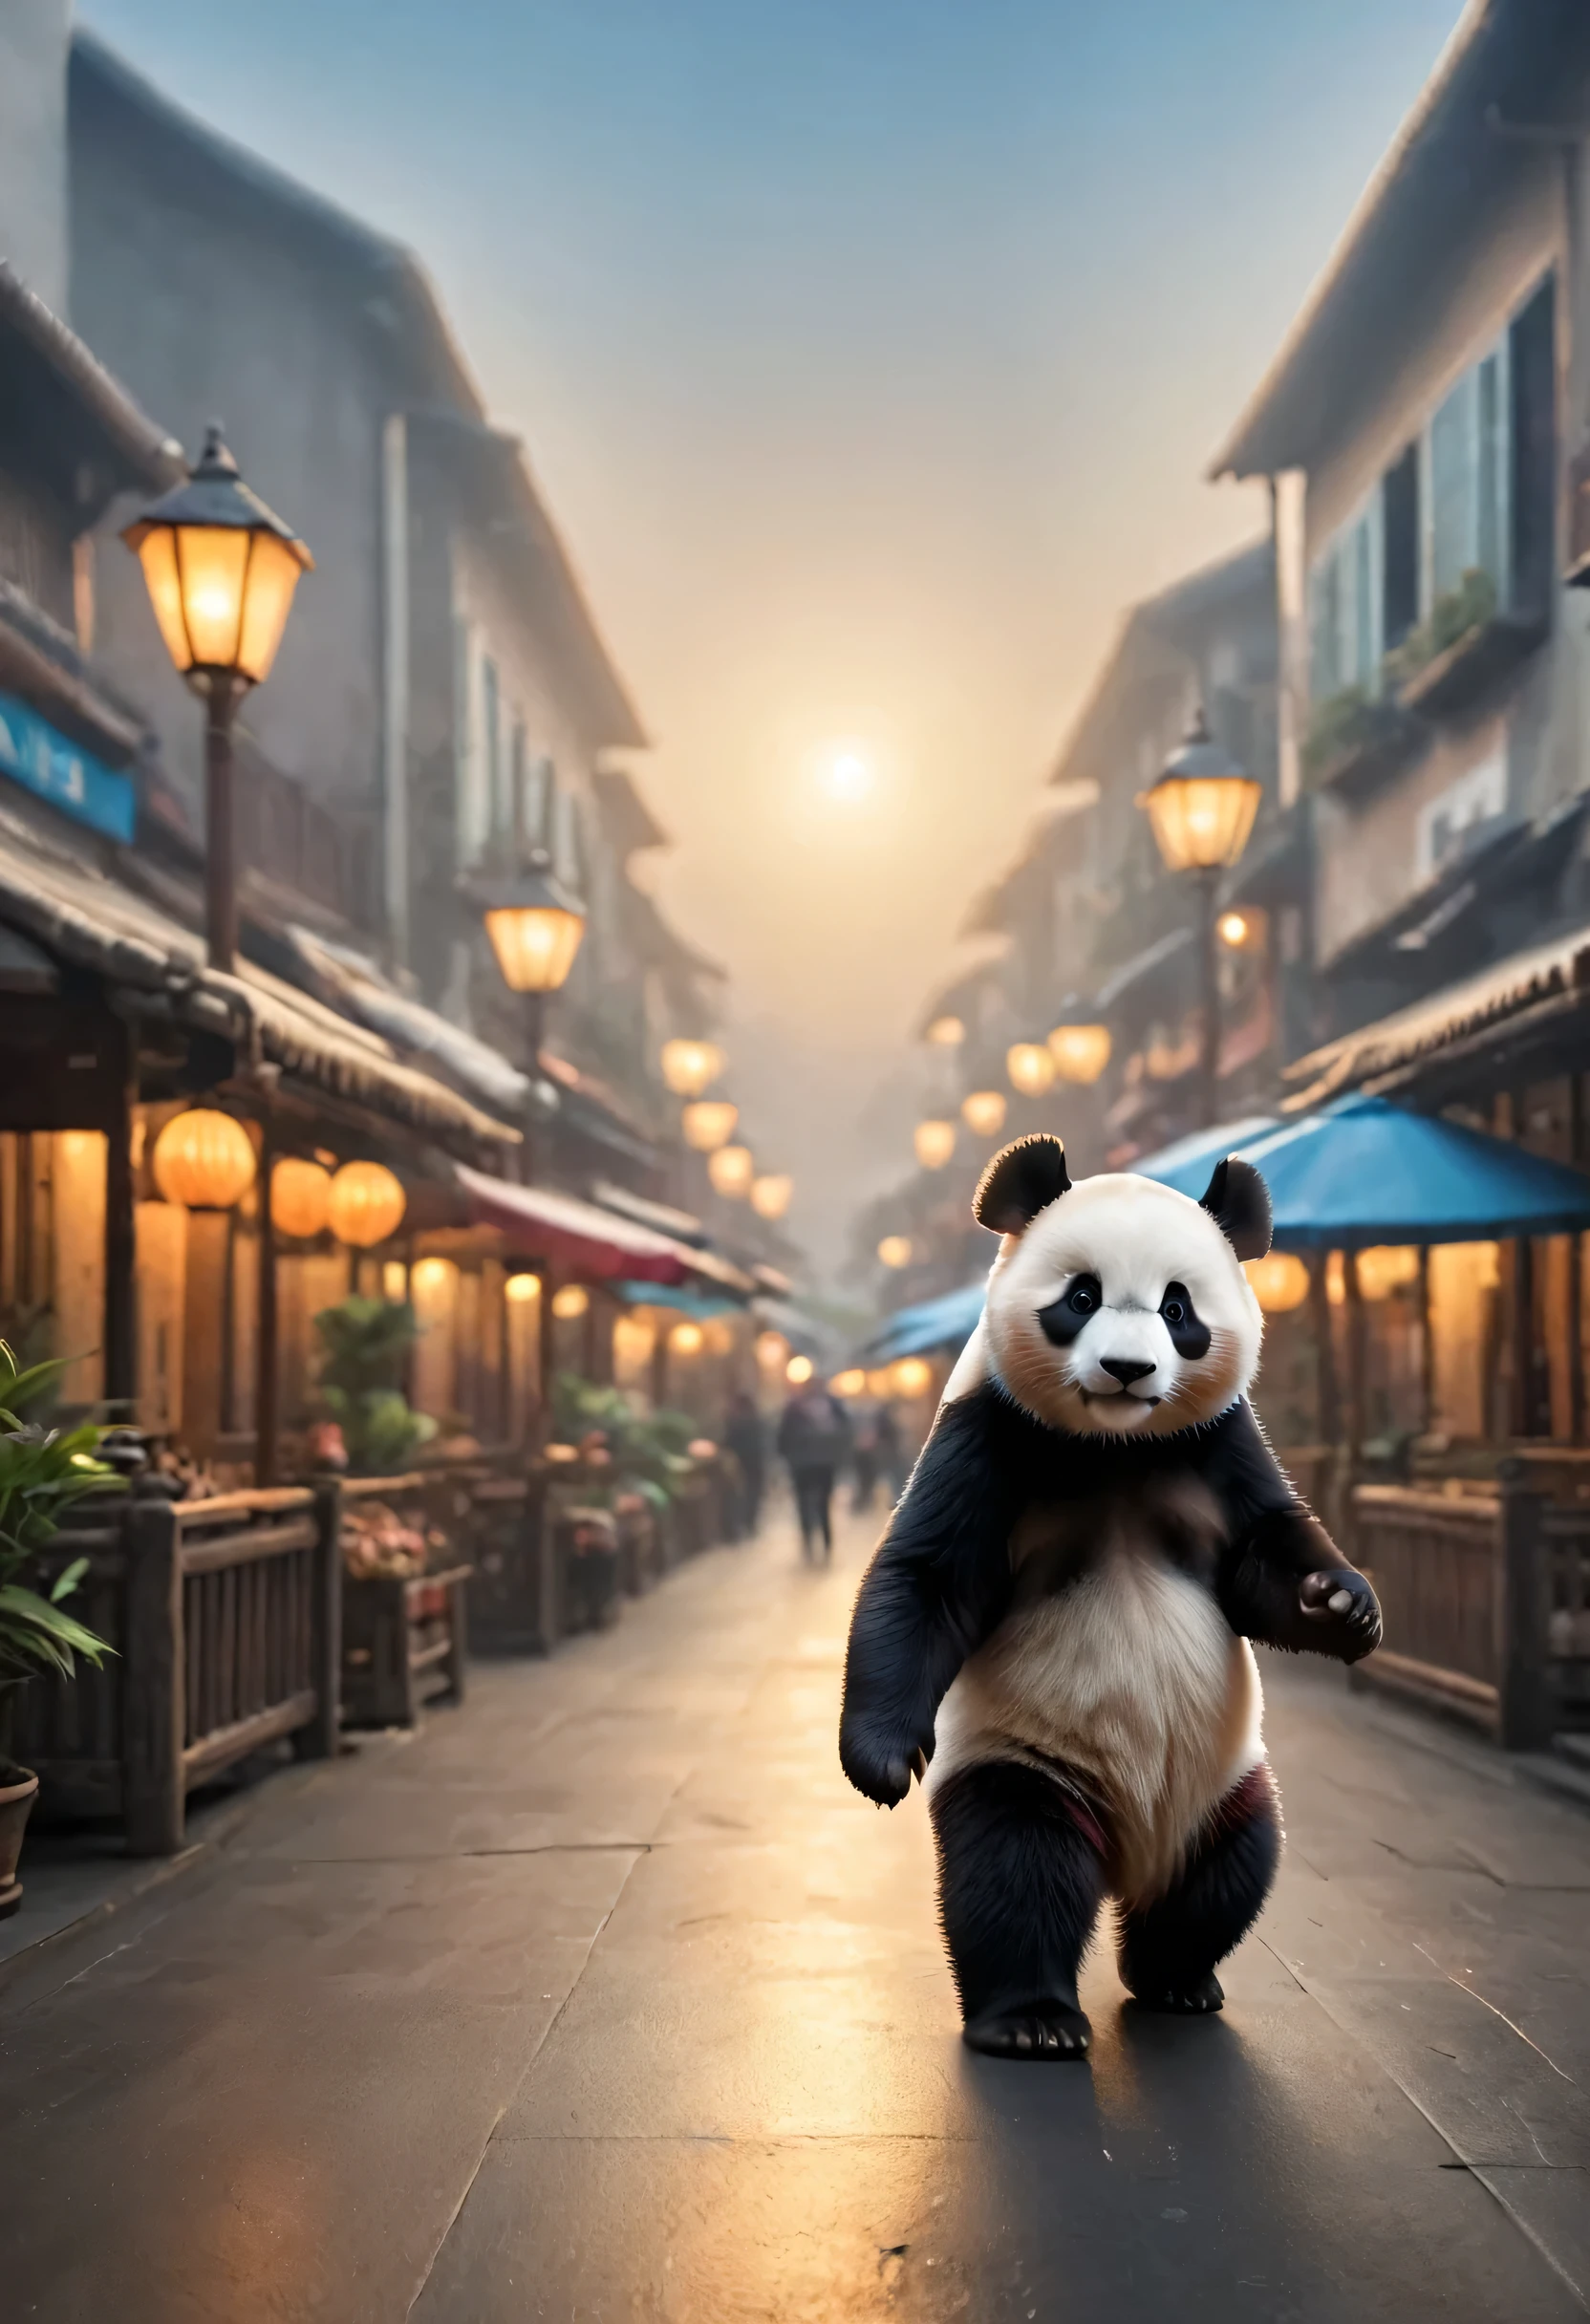 [Cute Panda greets the viewers, Pierre＝Art by Auguste Renoir and Jeremy Mann, (Viewpoint angle:1.2), Realistic, Ray Tracing, Beautiful lighting,masterpiece:RAW Photos,National Geographic,Photorealistic,Cute Panda,The best masterpiece,Fluffy Panda,Beautiful light and shadow,Reality:0.35]